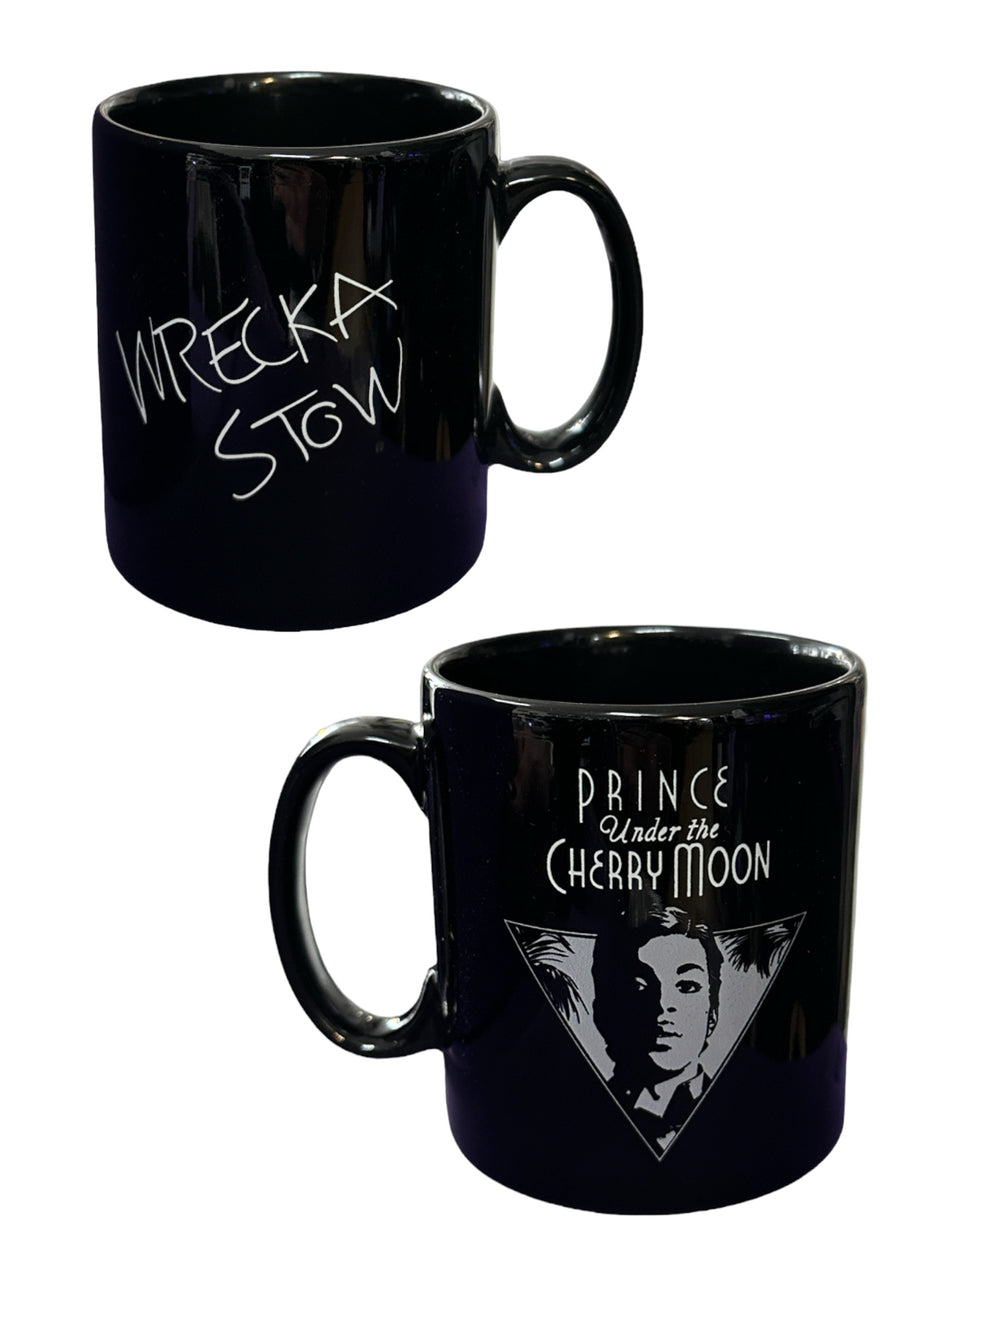 Prince – Under The Cherry Moon Official & Xclusive Licensed Ceramic Mug LTD EDITION